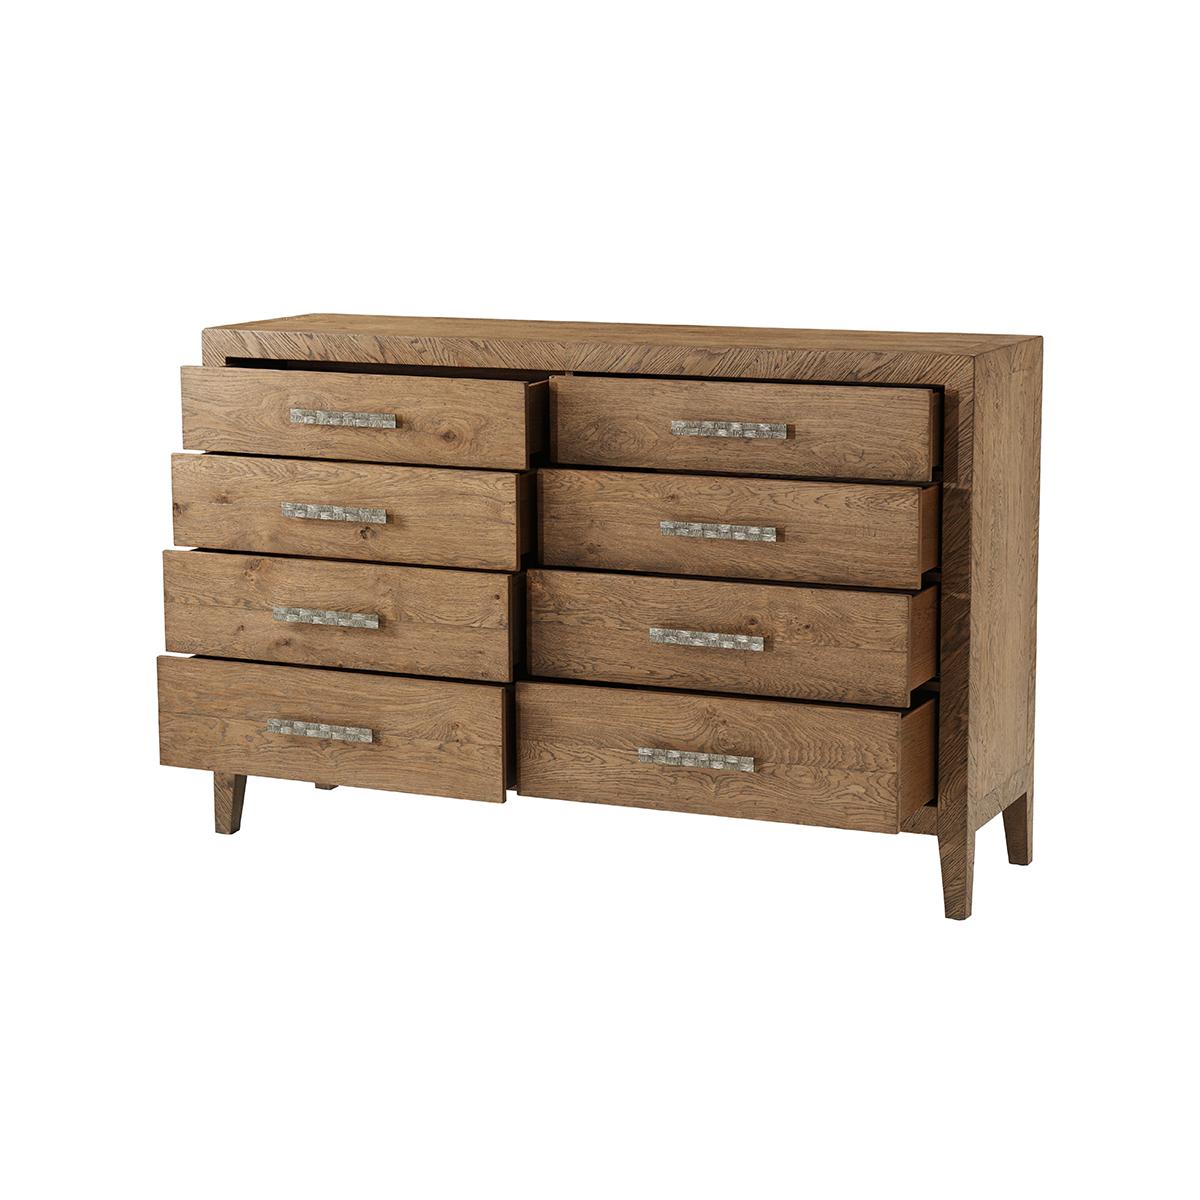 In a light oak finish with a modern tapered leg, adds an interesting and innovative element to any bedroom. Displayed with eight hand-crafted pull-out frieze drawers that are accented by hammered aluminum handles.
Dimensions: 68